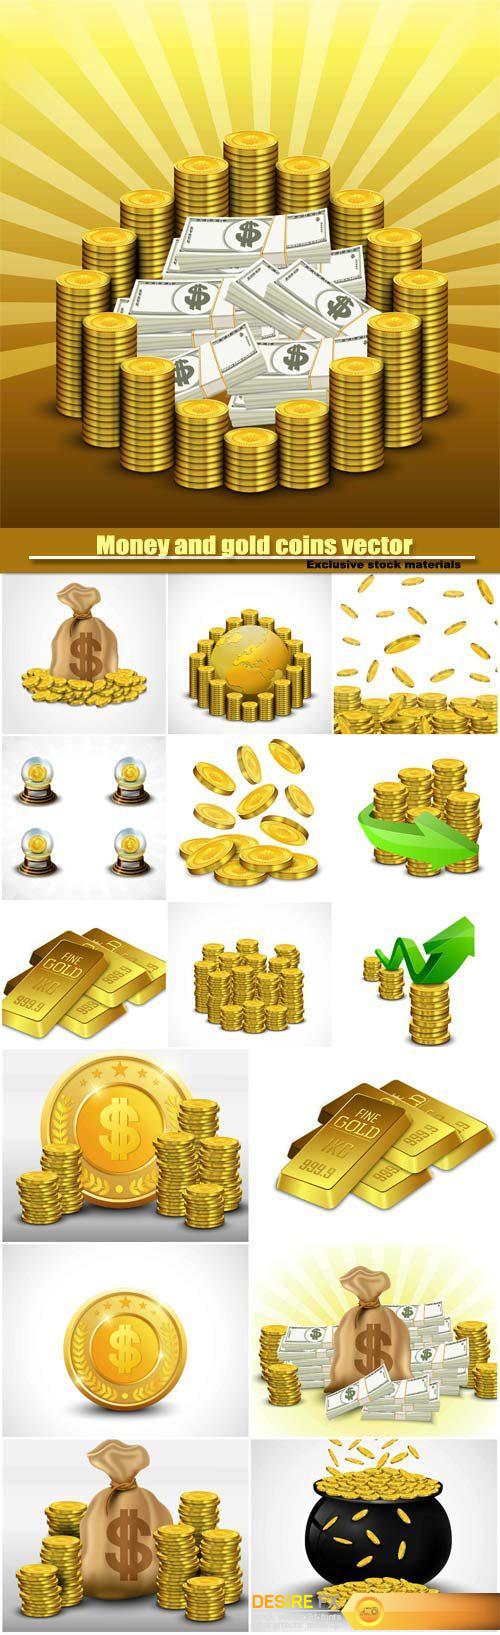 Money and gold coins vector